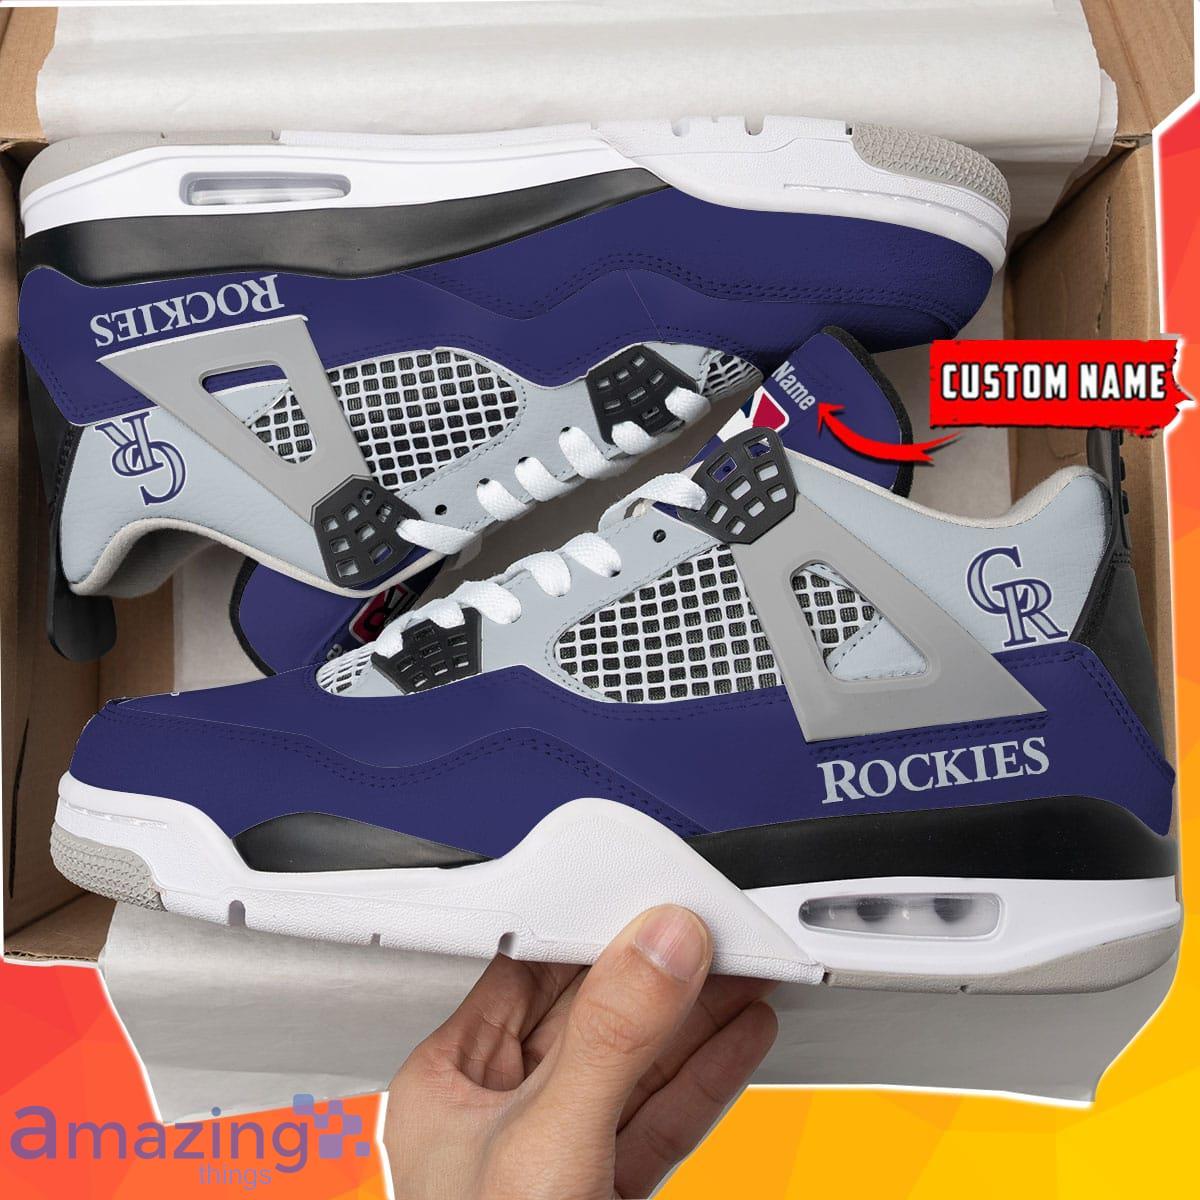 Colorado Rockies Personalized Air Jordan 4 Sneakers Best Gift For Men And Women Product Photo 1